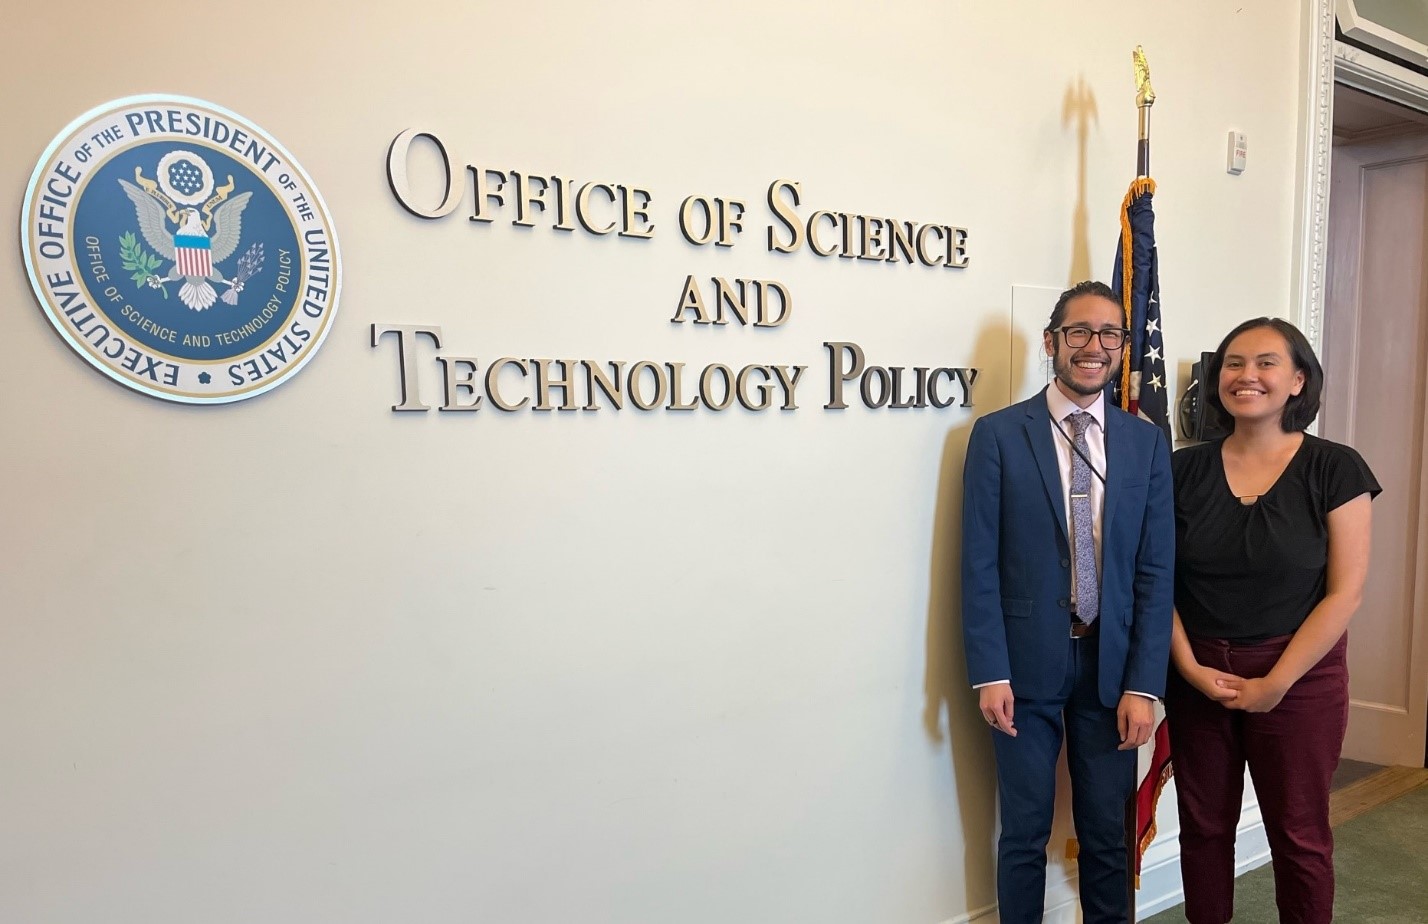 Haley Case-Scott (right) and Julian Reyes (left) in 2023 beside the OSTP sign